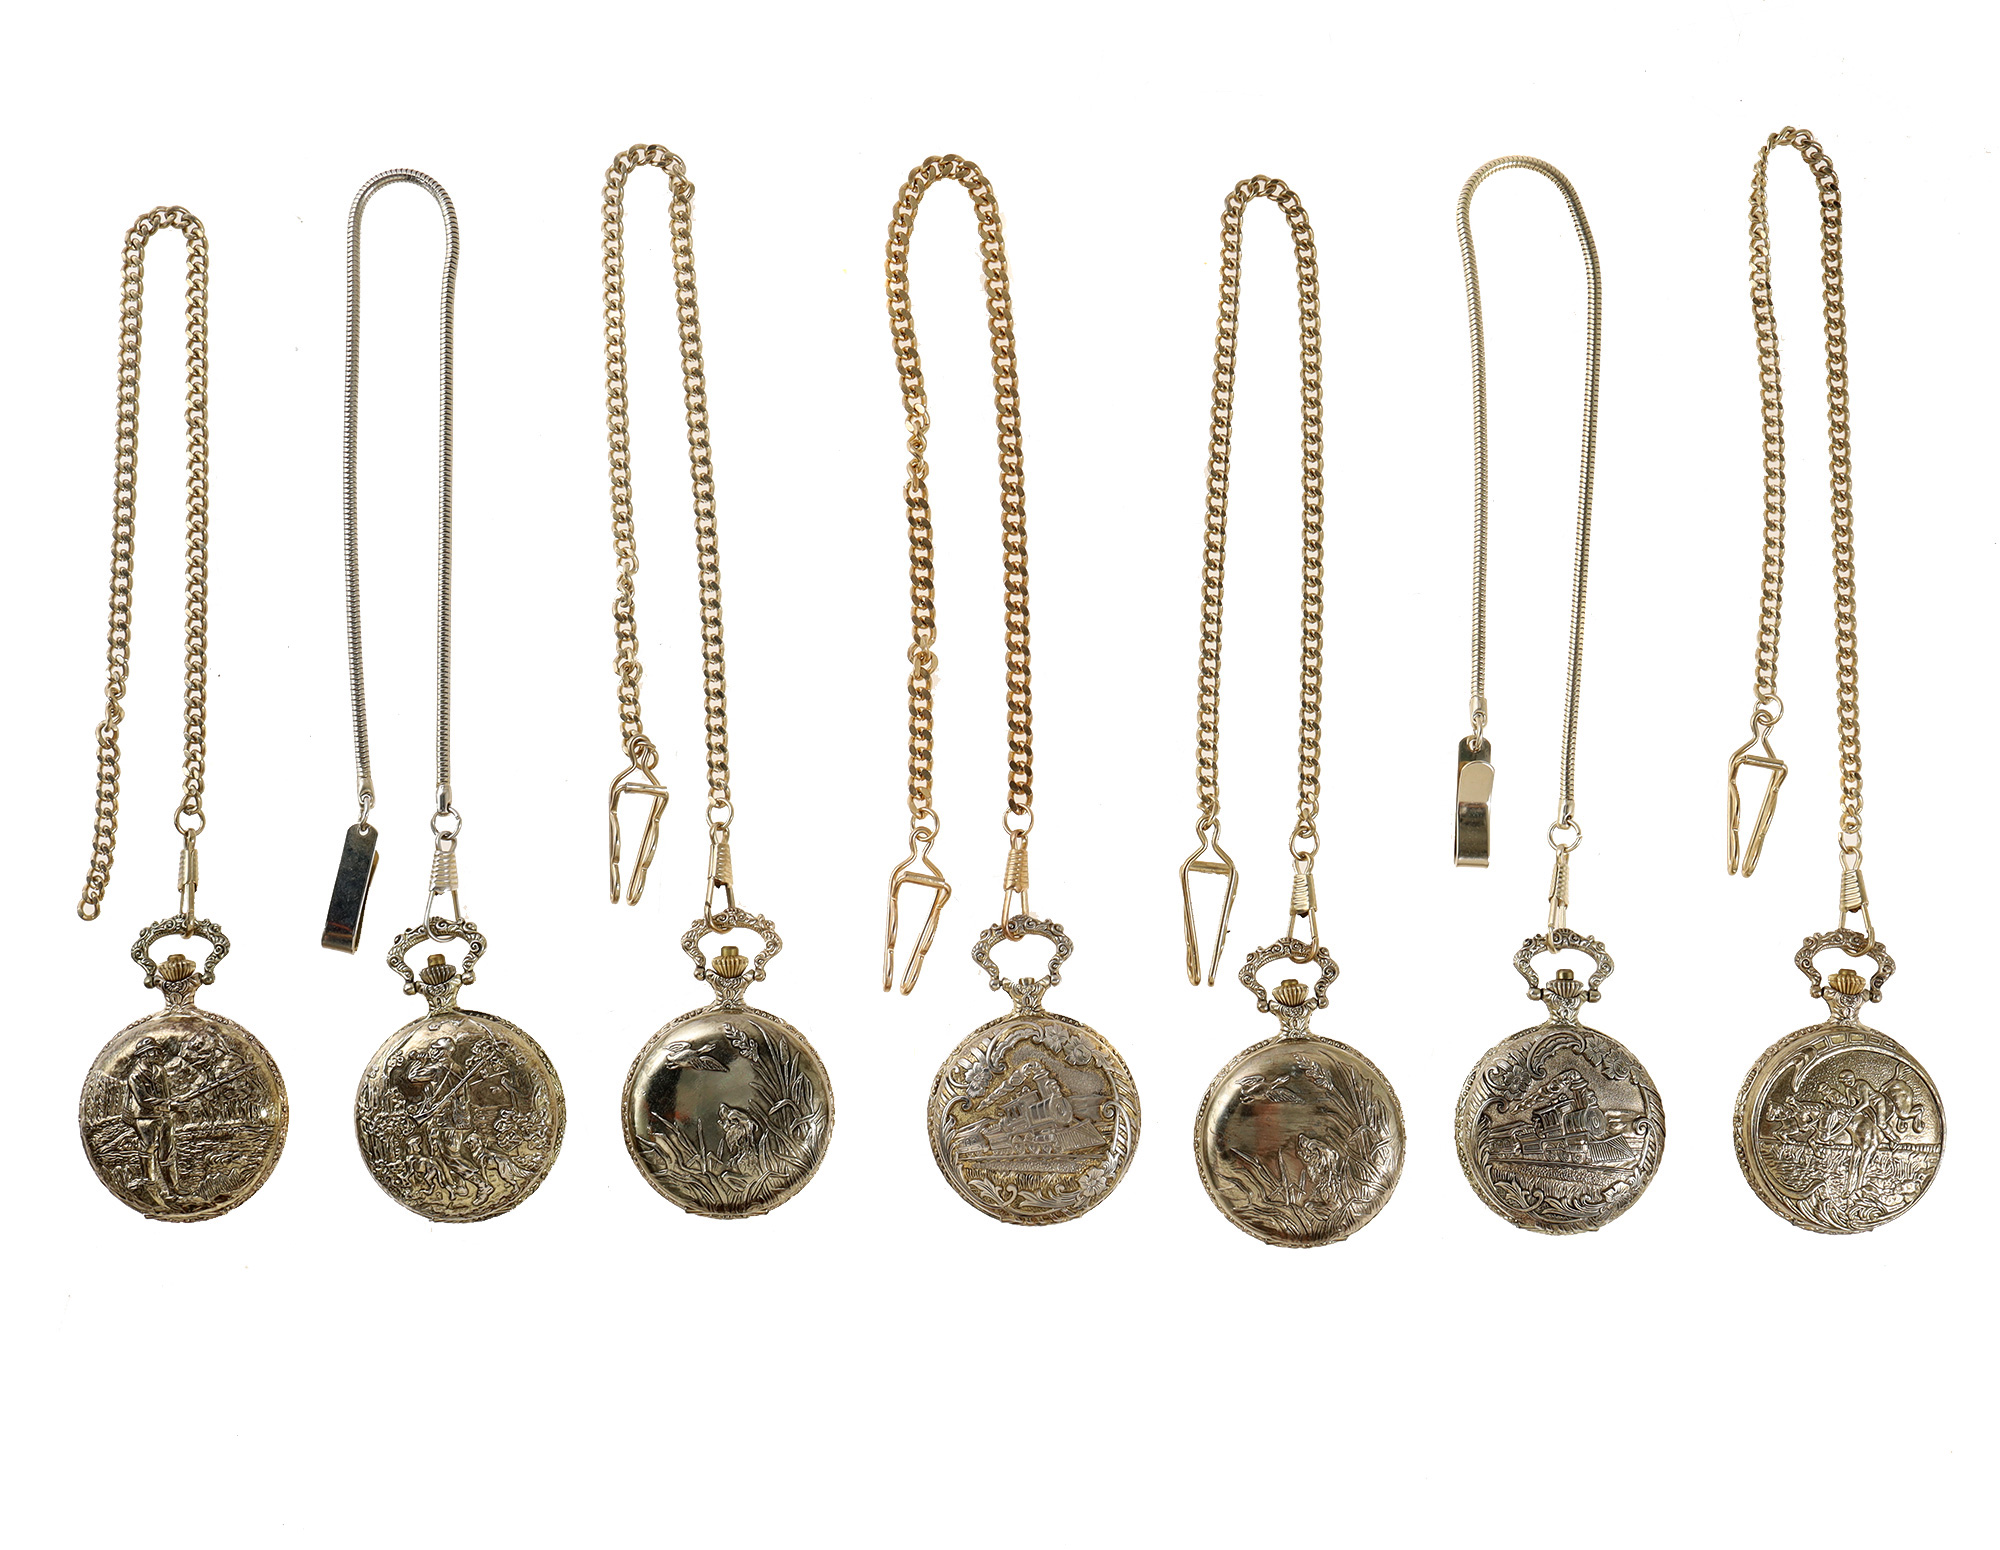 SET OF SEVEN REMINGTON POCKET WATCHES WITH CHAINS PIC-1